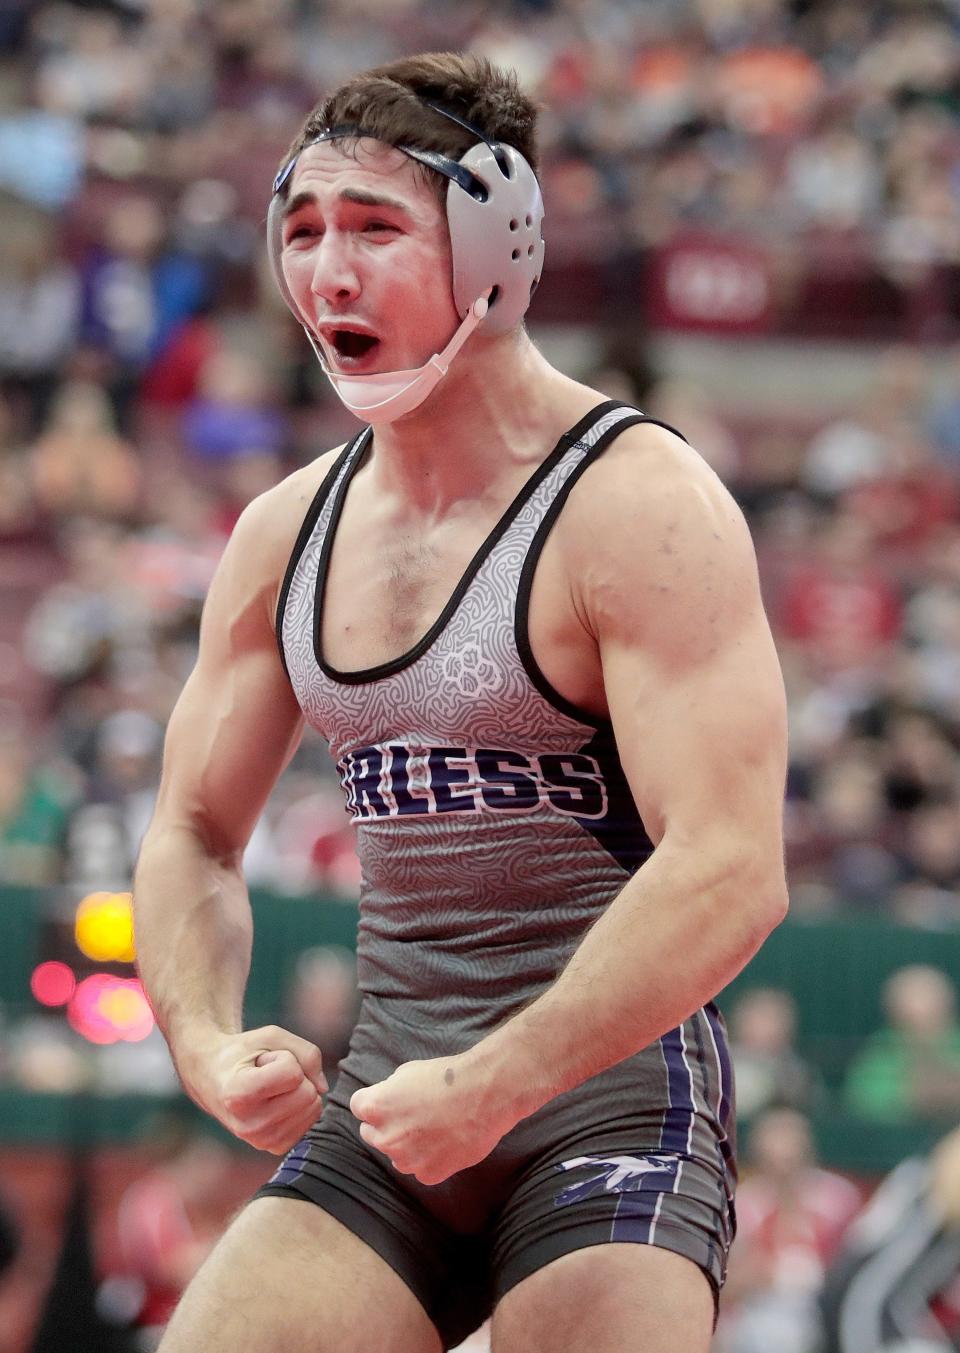 Fairless' Max Kirby celebrates his semifinal win over Dylan Newsome of Hartley in their 165-pound match at the OHSAA State Tournament in Columbus Saturday.